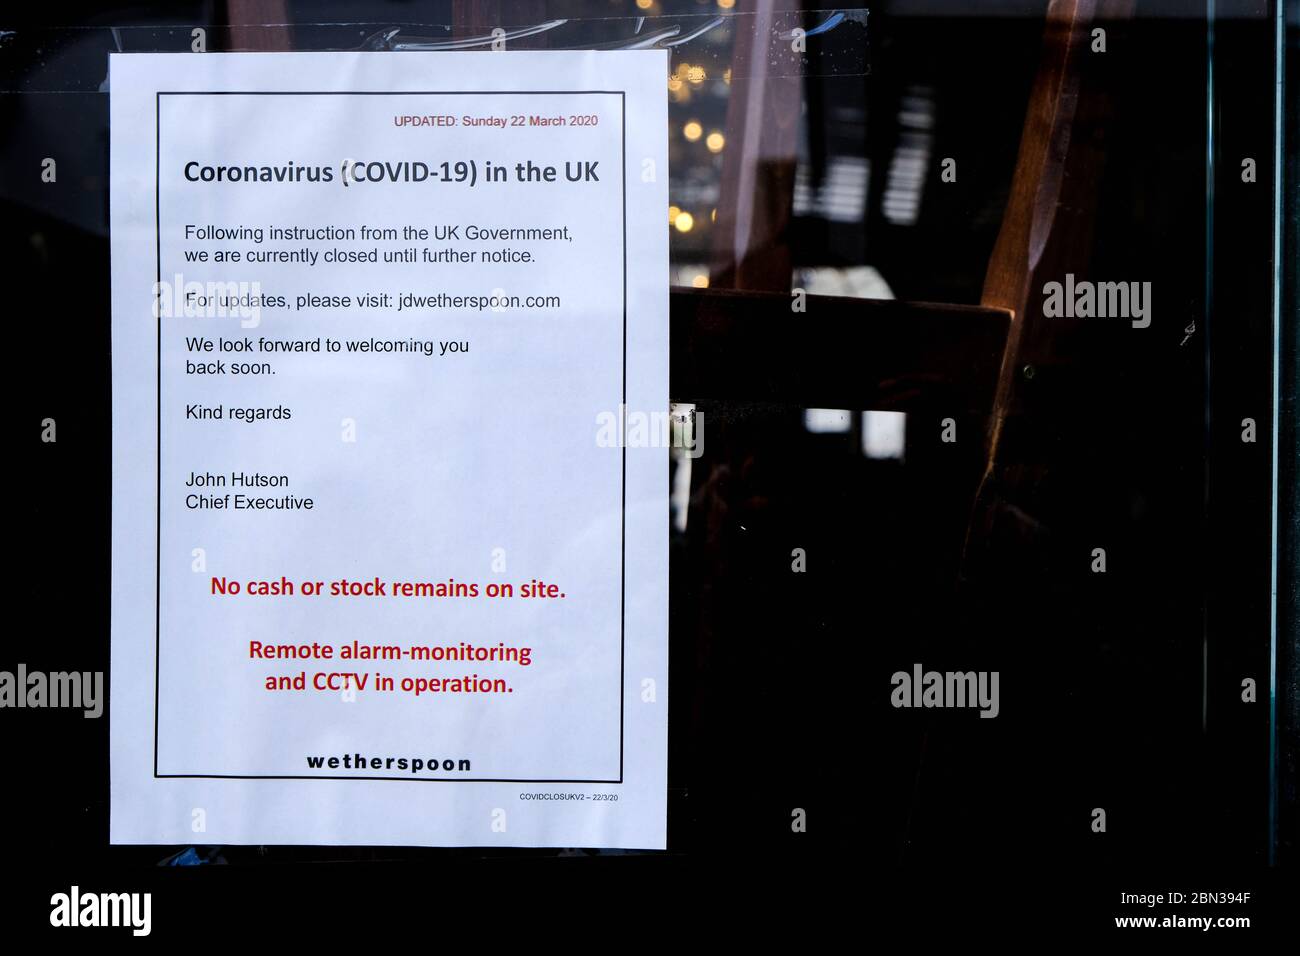 A Customer Advice Notice In The Window Of A Wetherspoons Pub During The Coronavirus Outbreak, South London 2020 Stock Photo